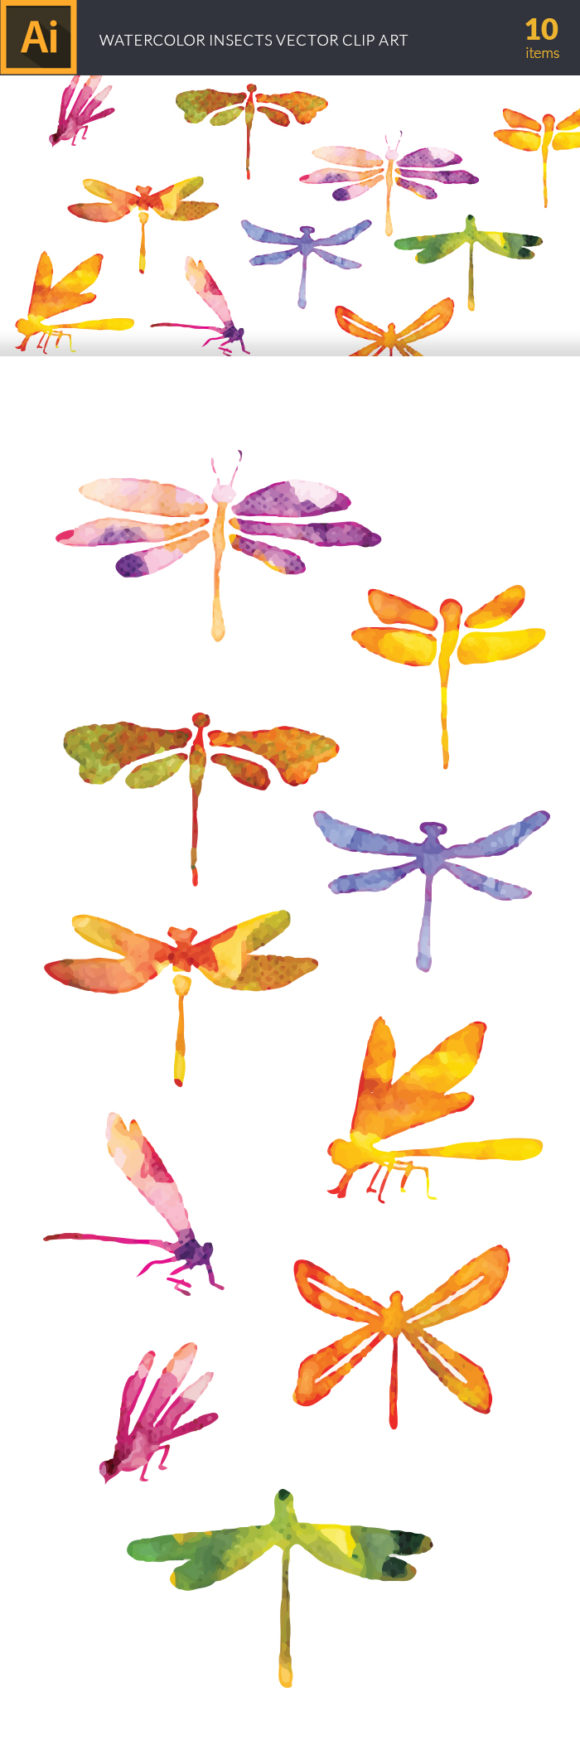 Watercolor Insects Vector Set 2